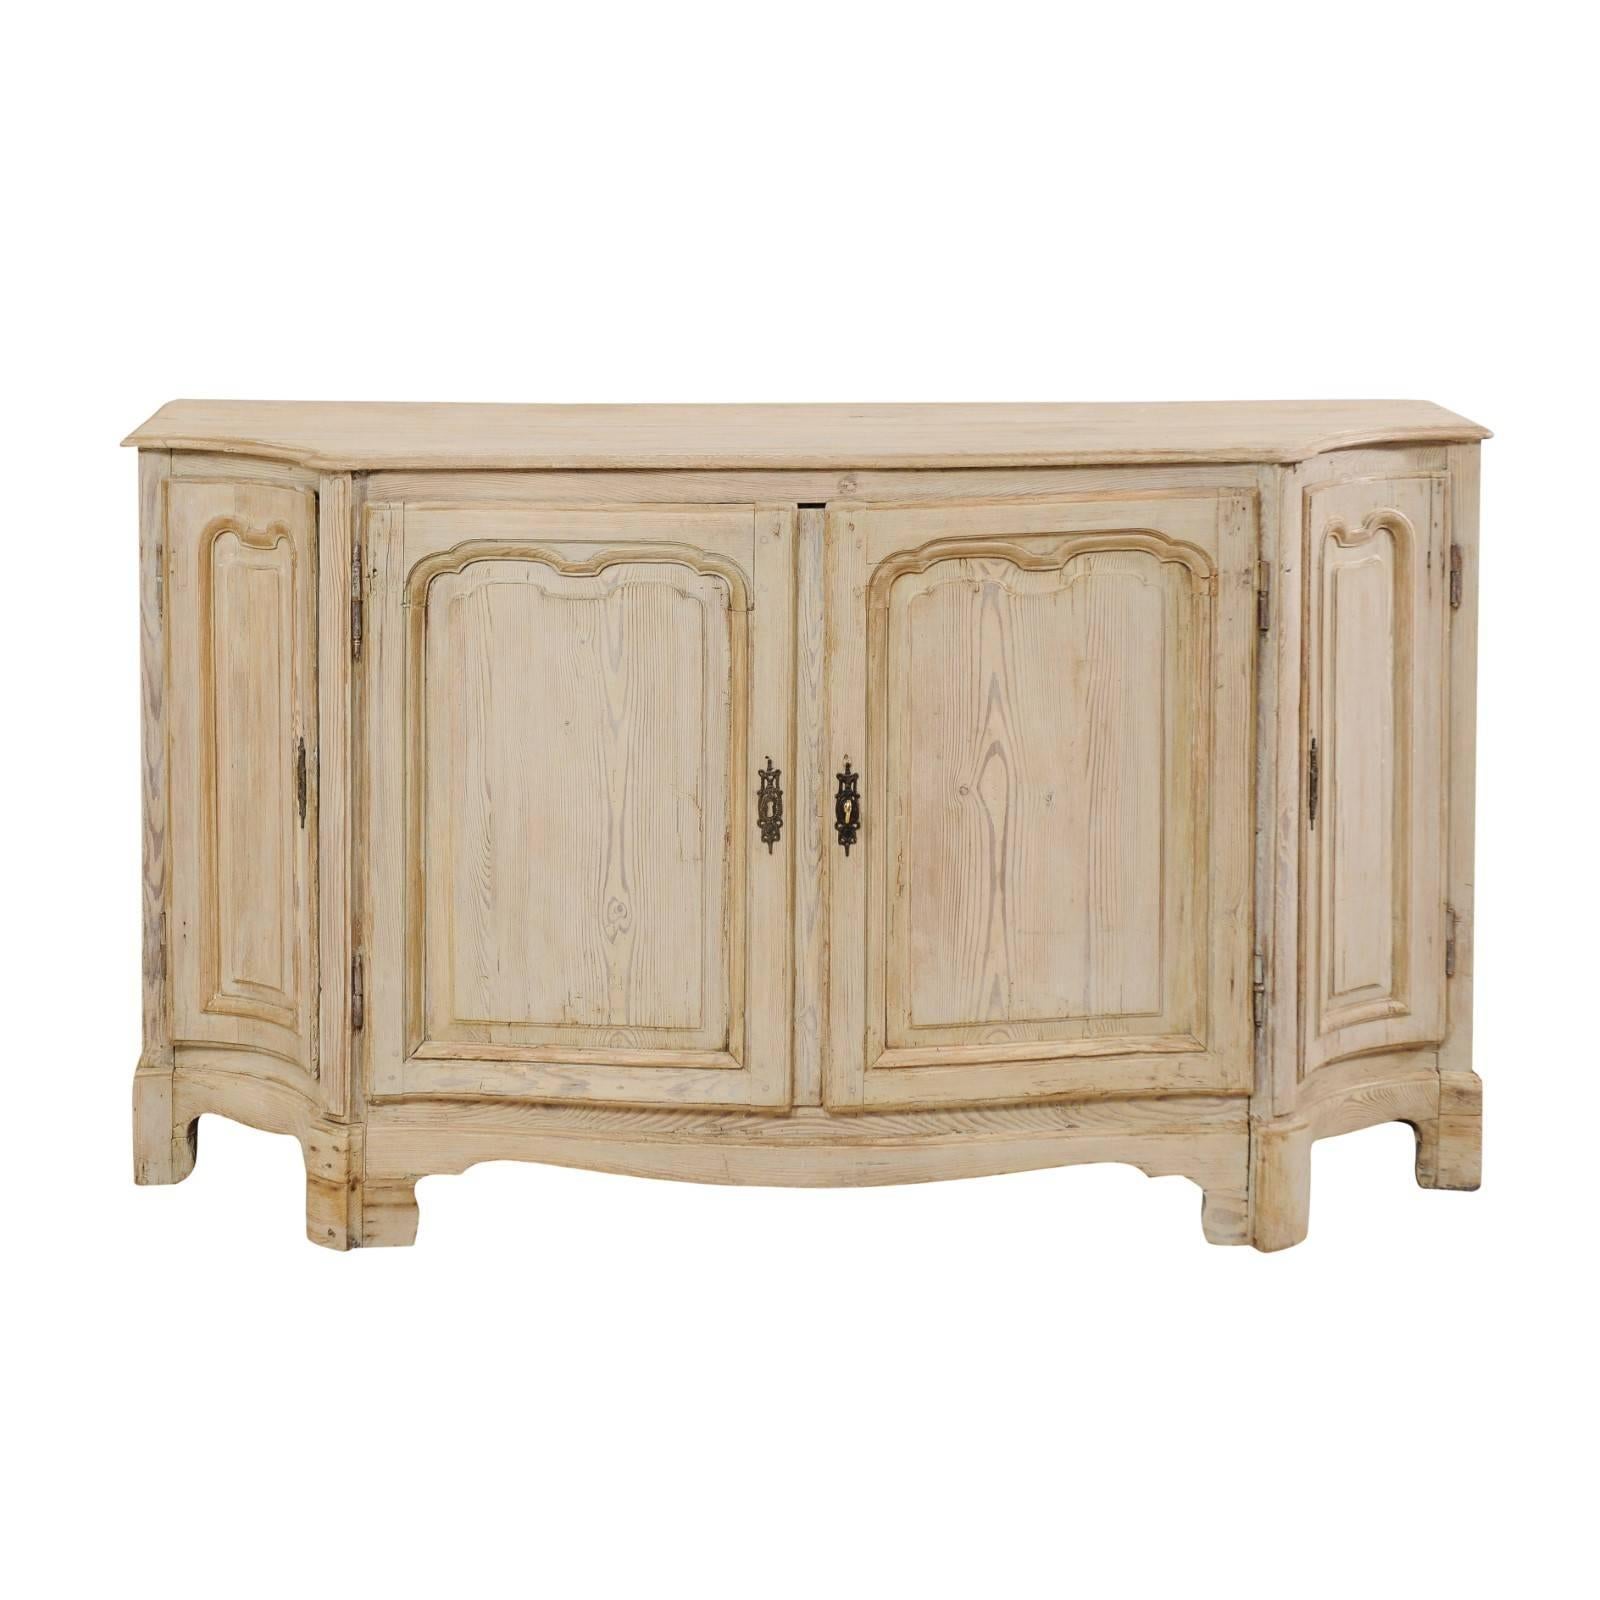 French, 18th Century Painted Neutral Cream and Beige Colors Wood Buffet Cabinet